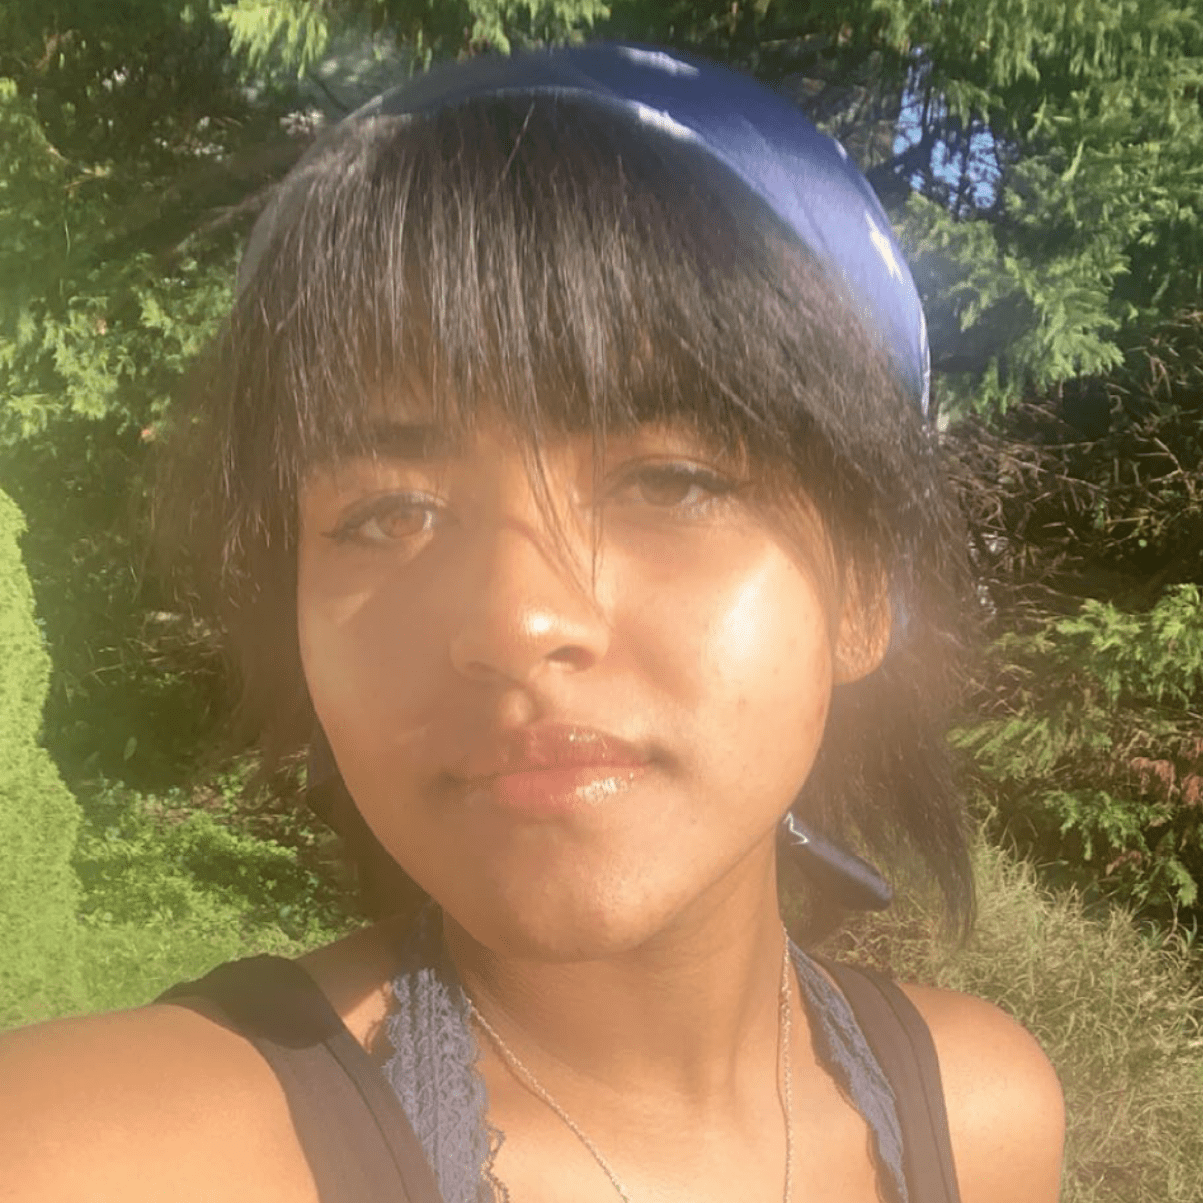 Kaity is standing in a wooded area, wearing a black tank top with a blue scarf in her hair